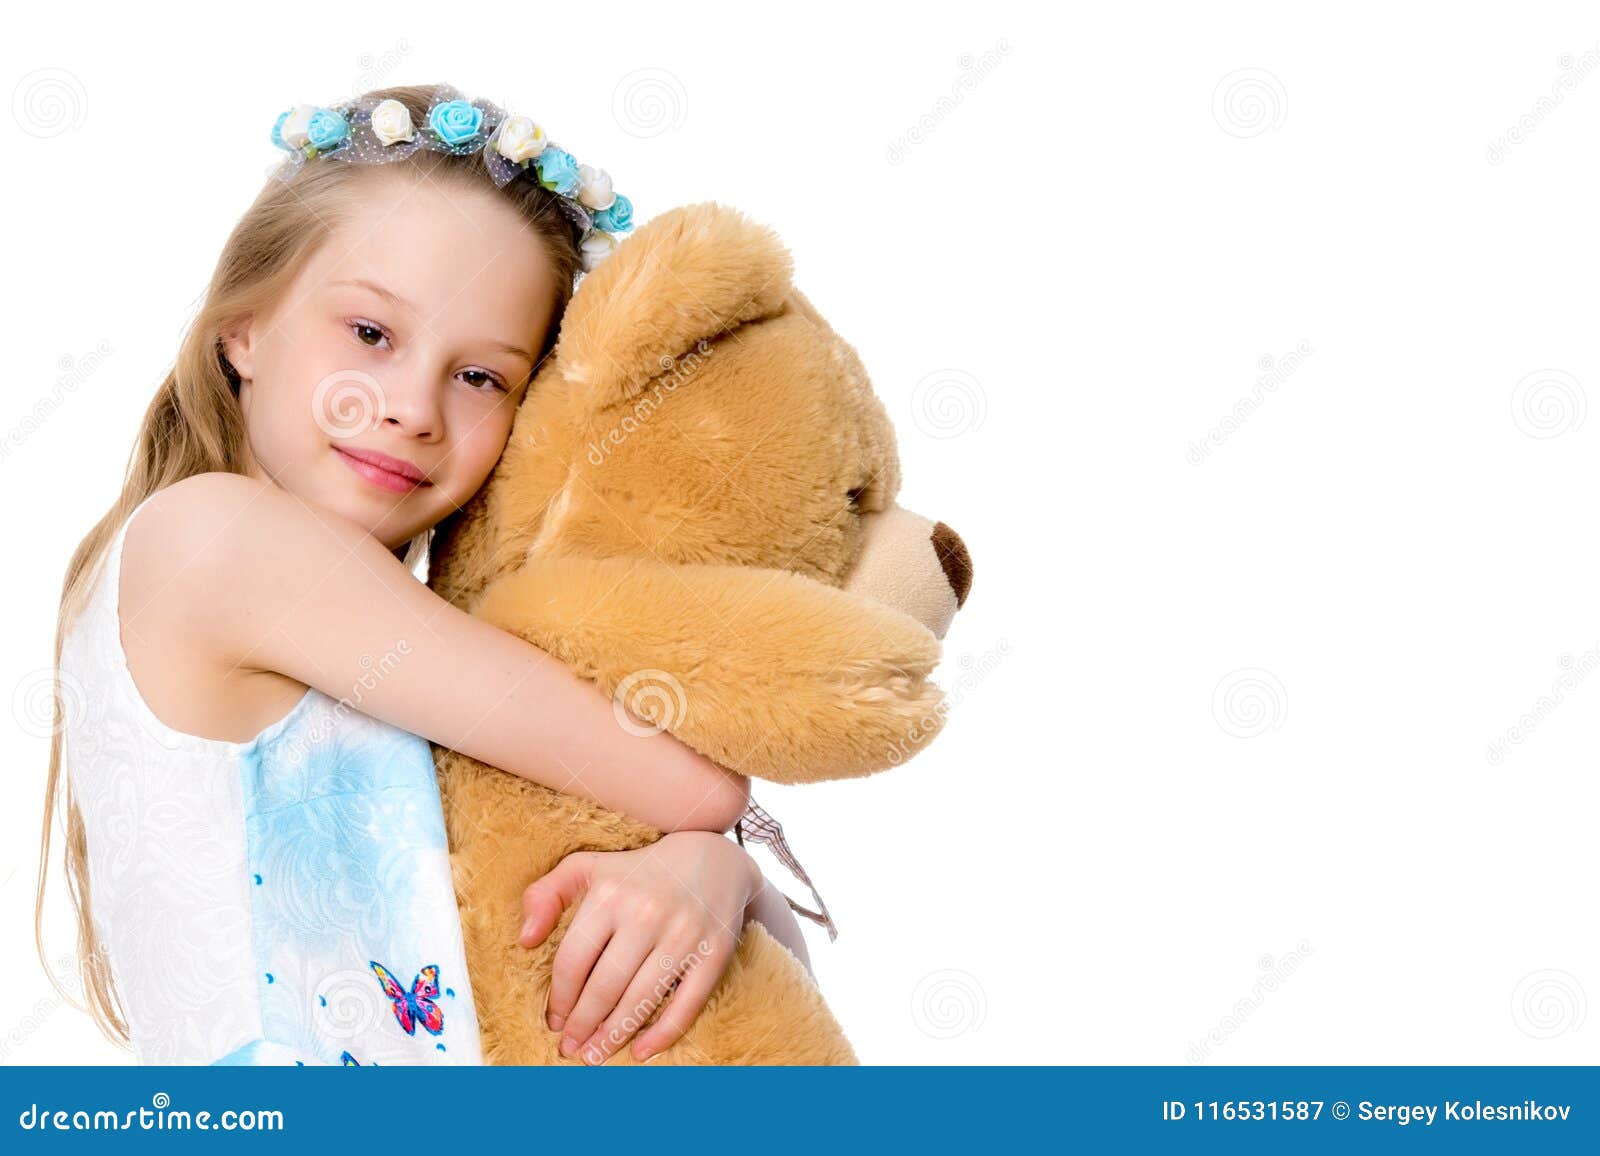 Little Girl with Teddy Bear Stock Image - Image of cute, playing: 116531587